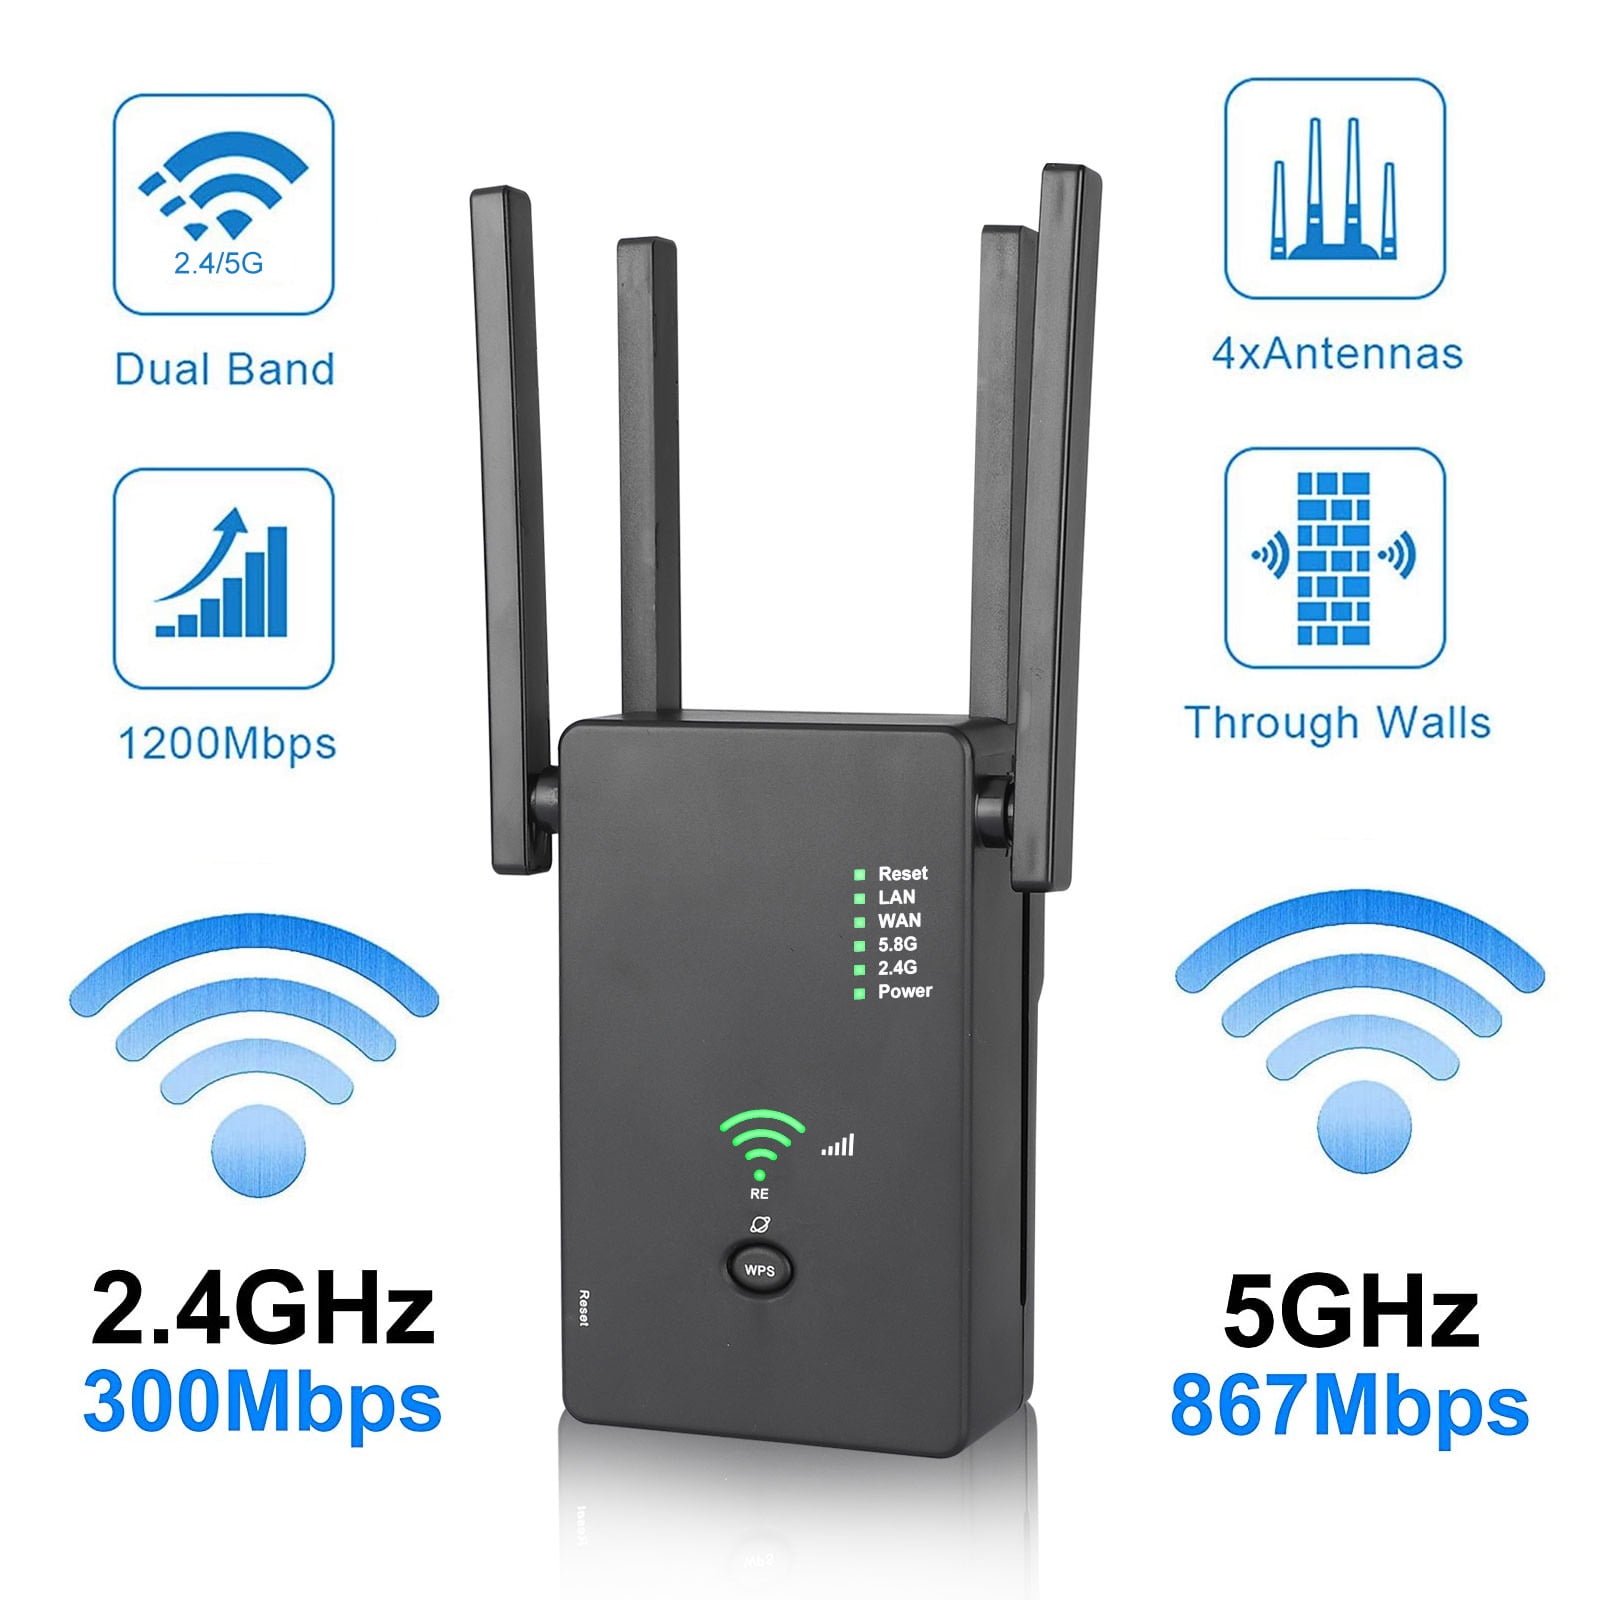 Without The room Irrigation TSV 1200Mbps WiFi Range Extender, Wireless WiFi Repeater Signal Booster  Cover up to 3500 sq.ft, Internet Signal Amplifier with 4 Dual Band  5G/2.4GHz Antennas Cover 25 Devices for Smart Home Office -